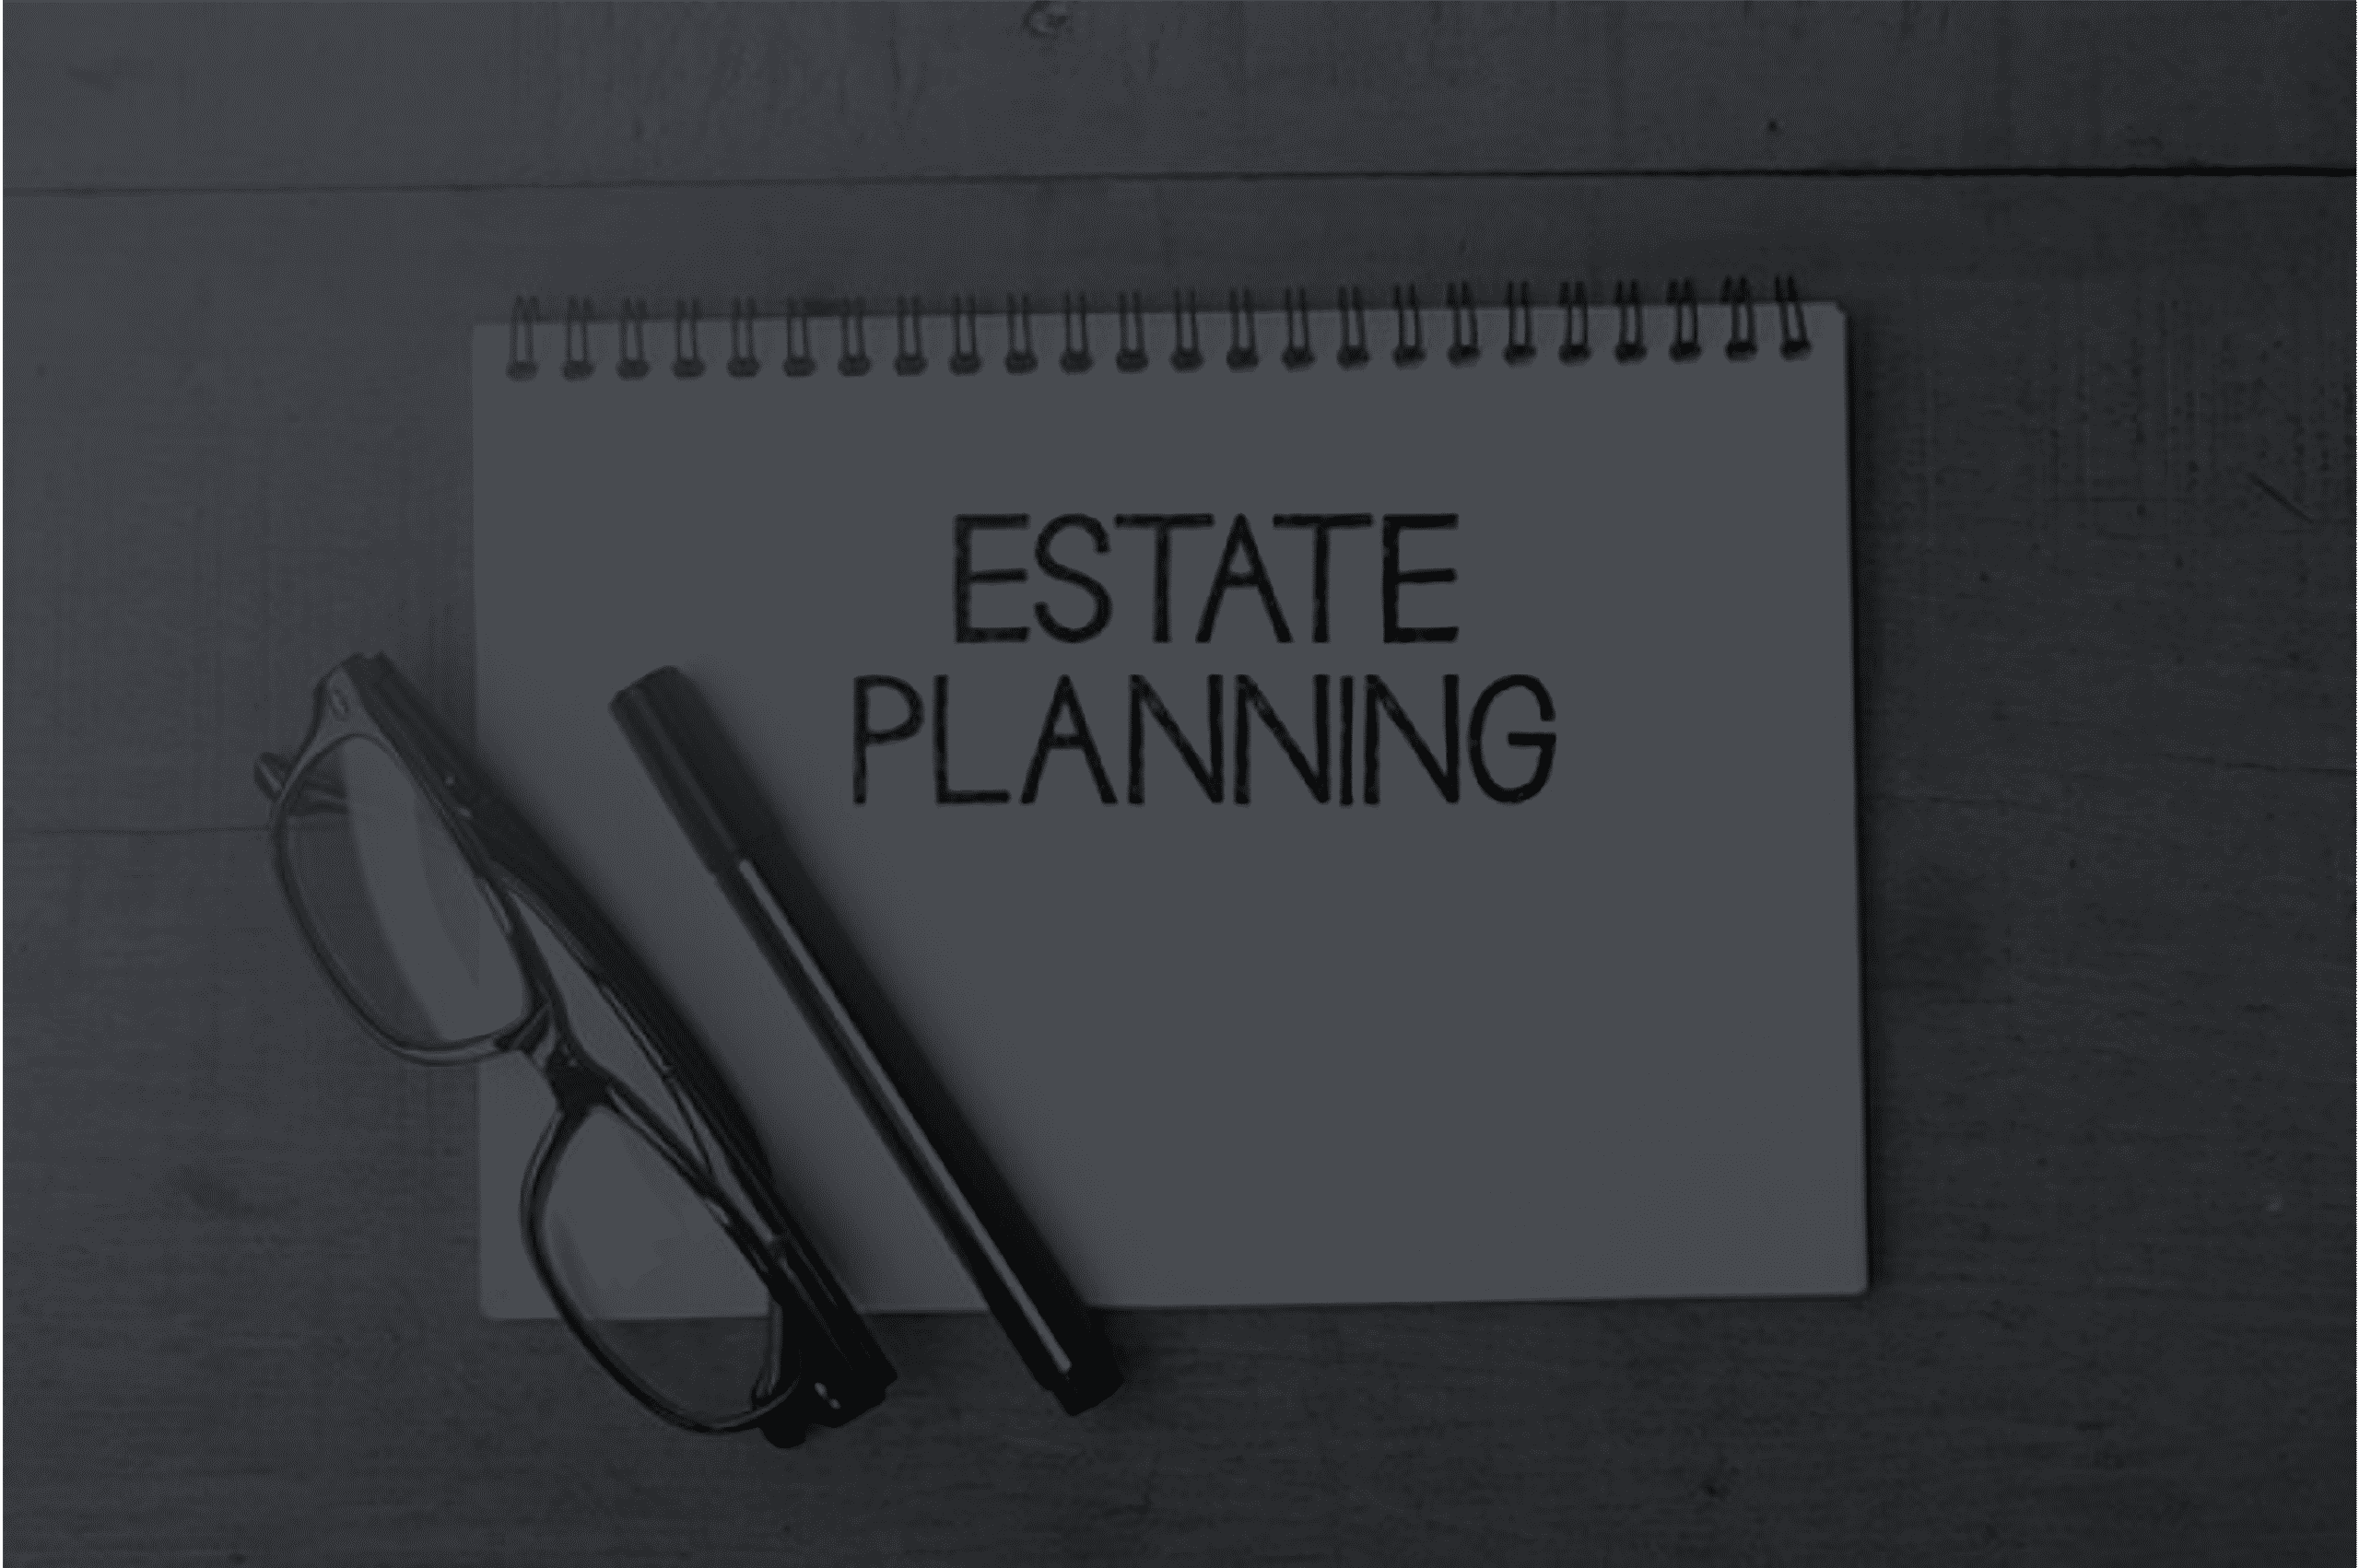 Common Estate Planning Questions Answered - Ally Wealth Management - Australian Expat Financial Planners